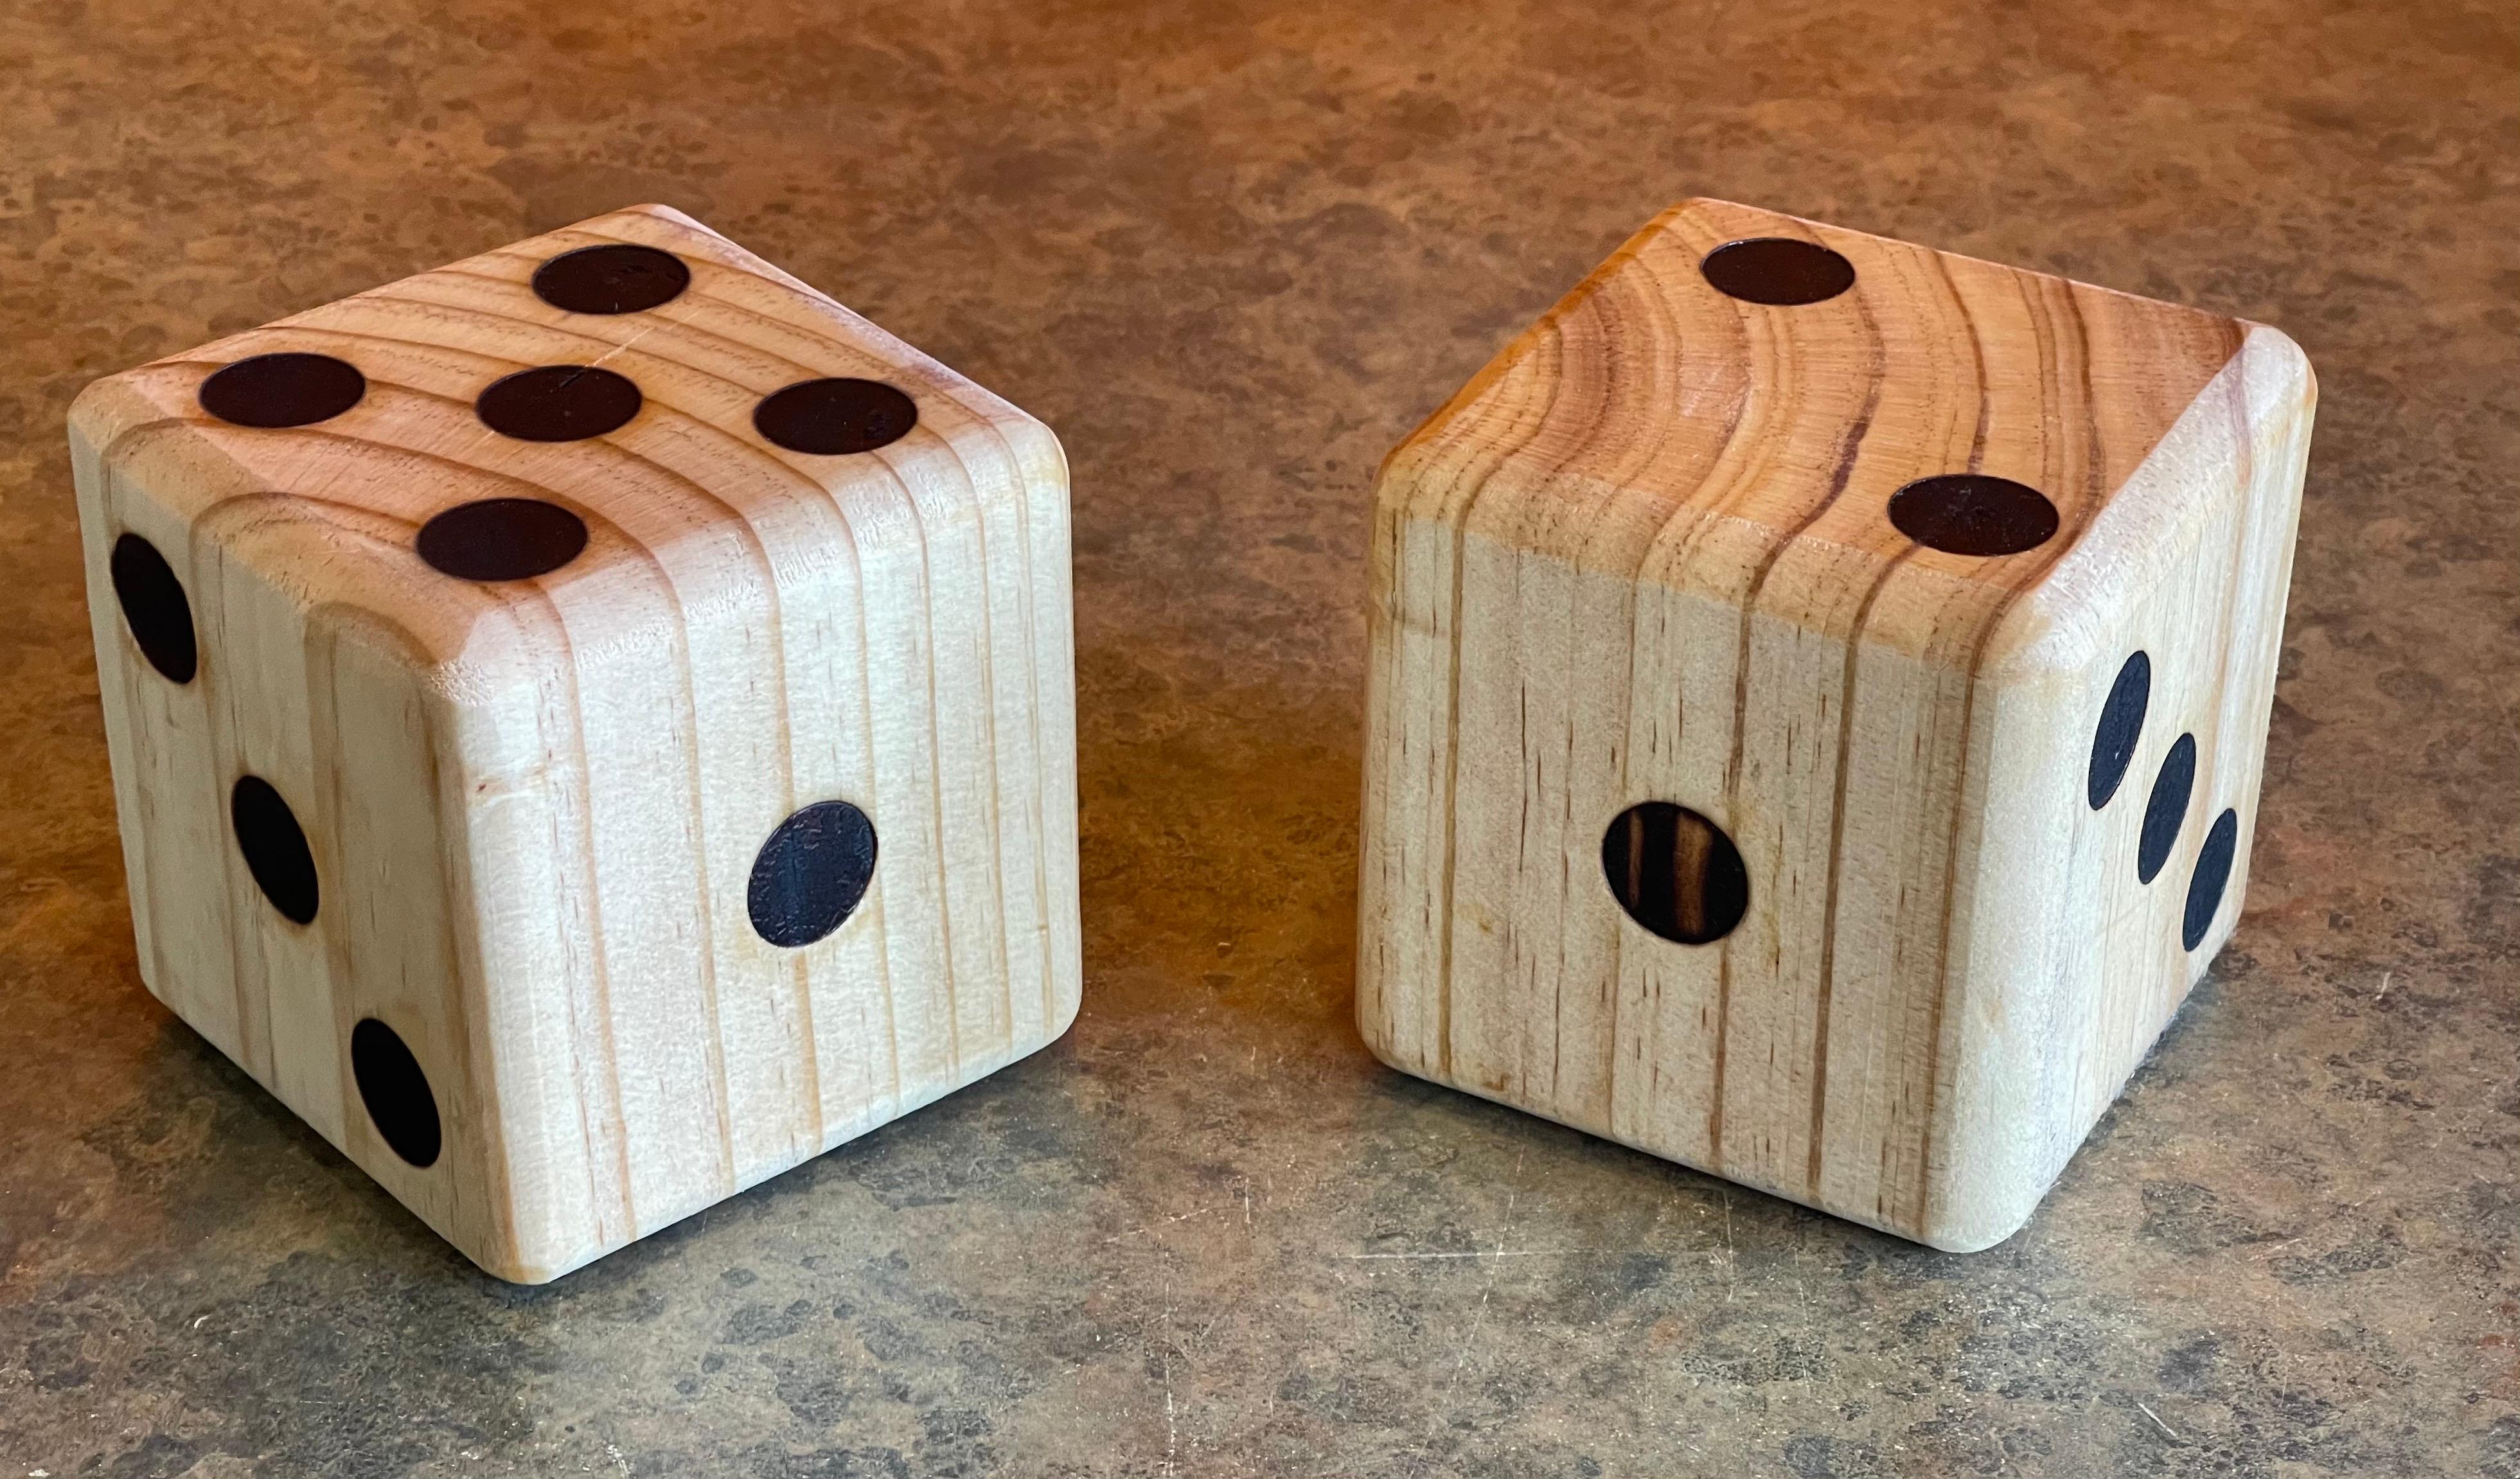 Pair of Solid Oak Mid-Century Modern Dice Bookends or Paperweights 1